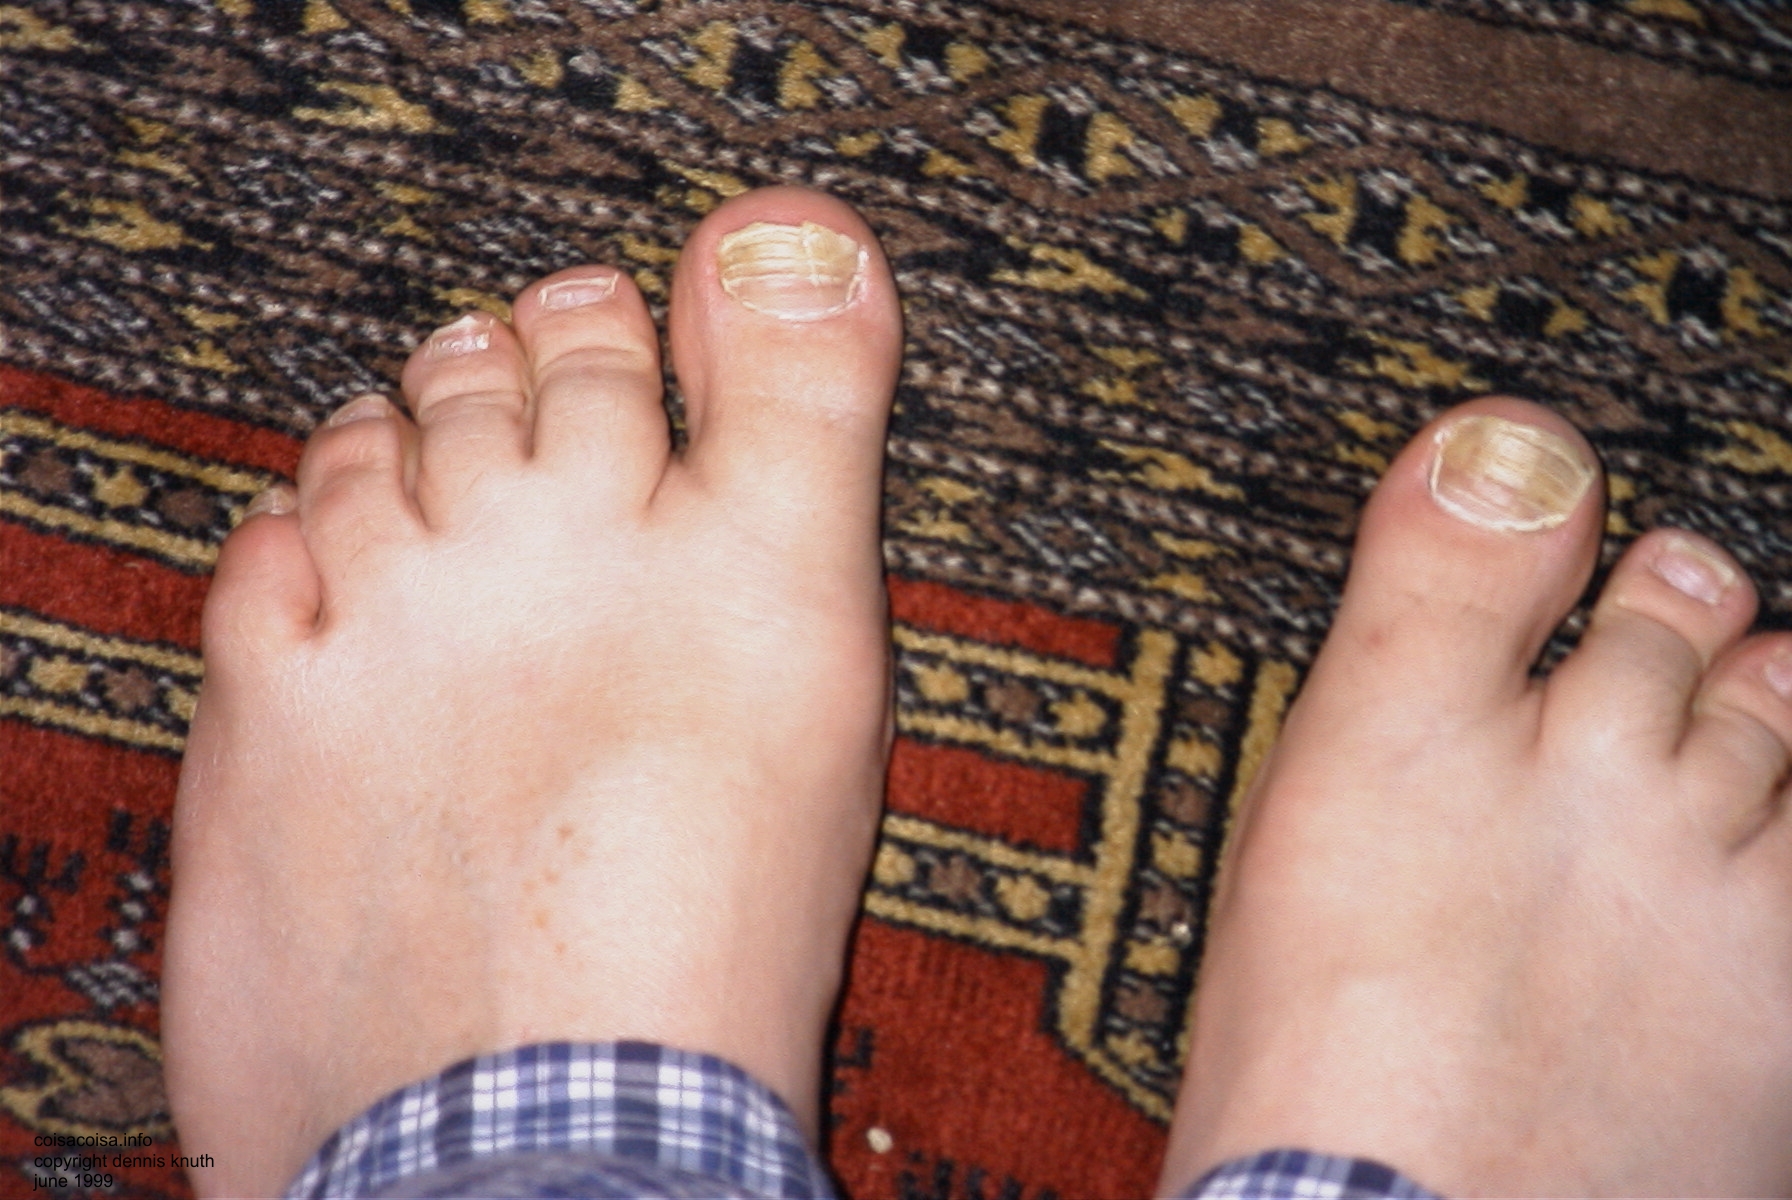 Feet and Toes on a Persian Carpter